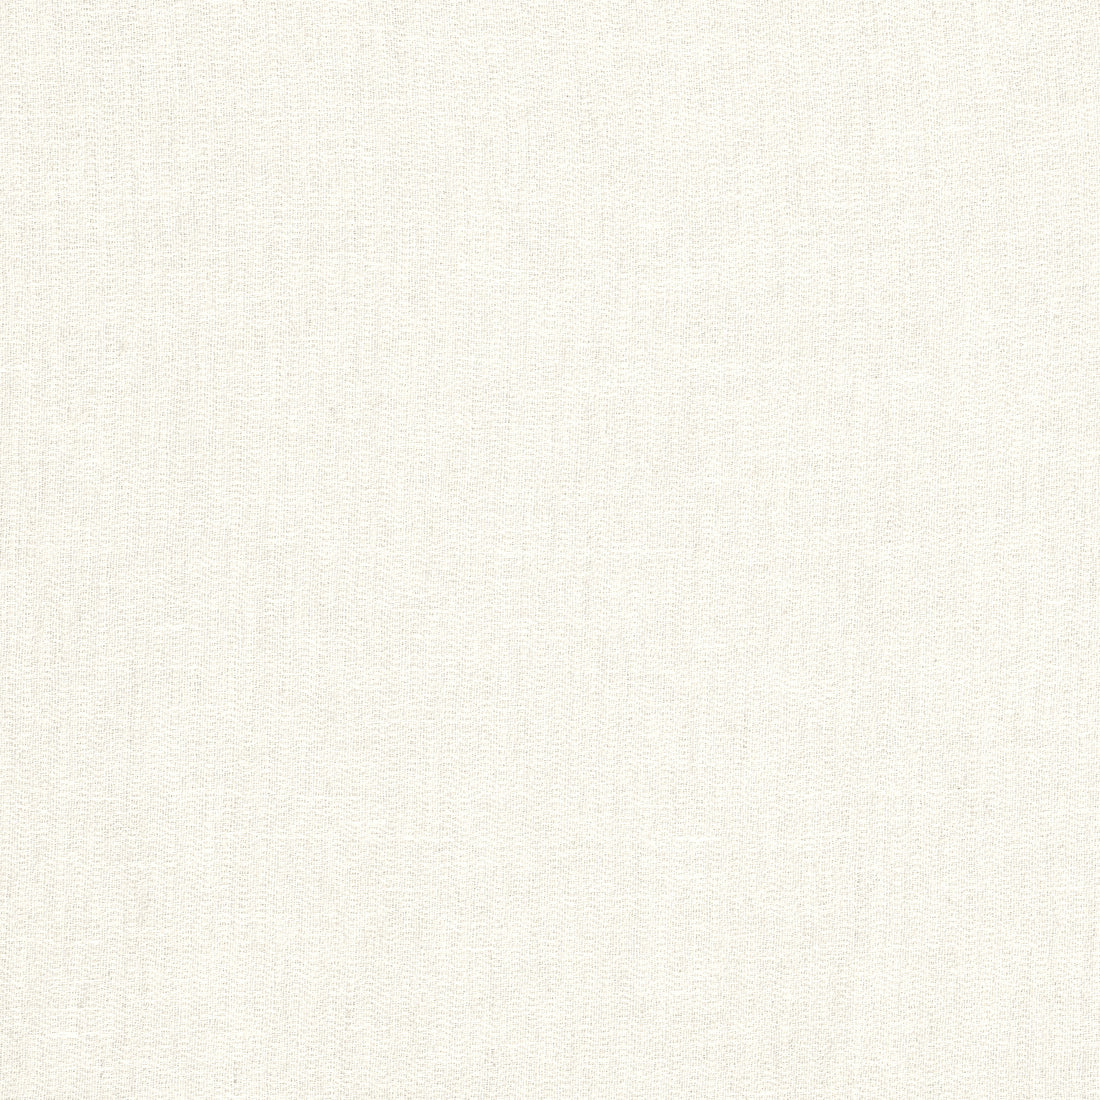 Laramie fabric in ivory color - pattern number FWW8205 - by Thibaut in the Aura collection